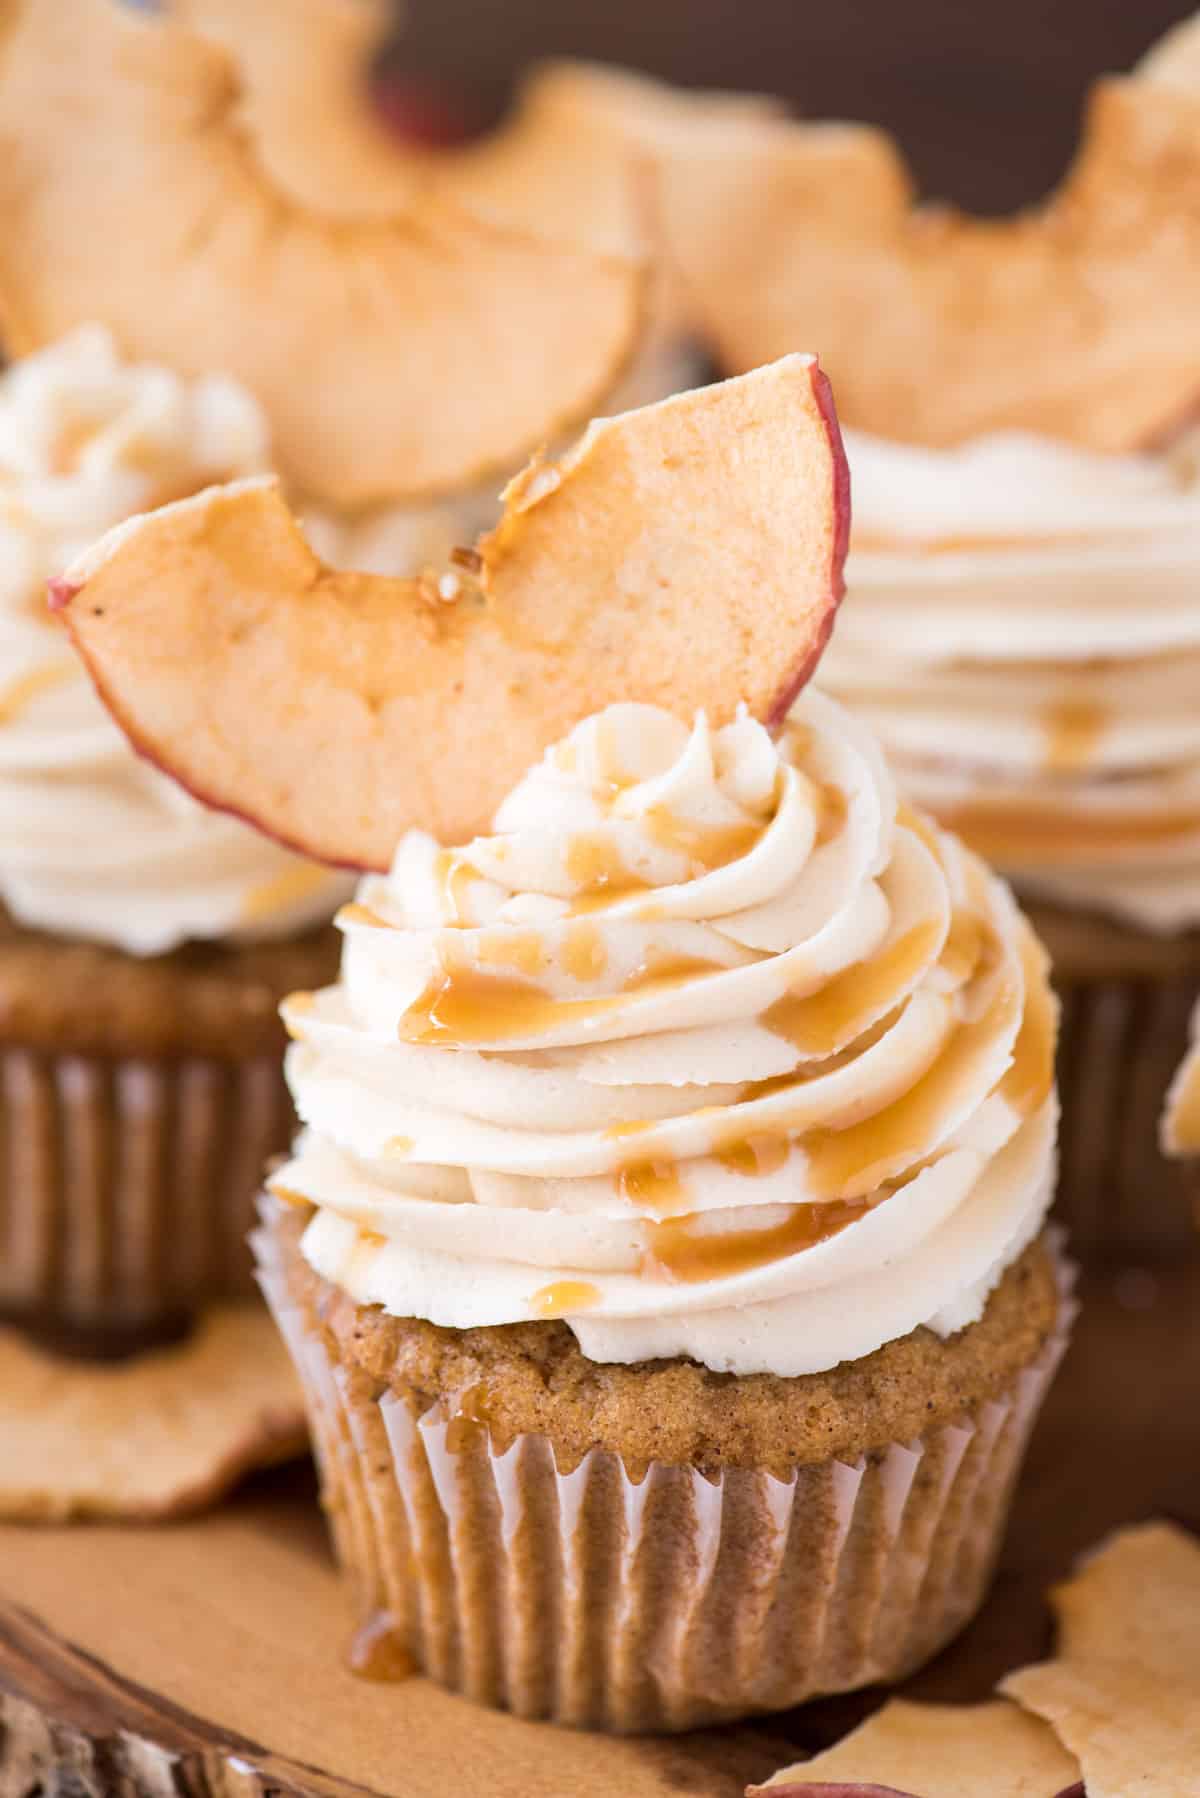 apple spice cupcakes with caramel frosting and apple chips on wood cake stand with wood background